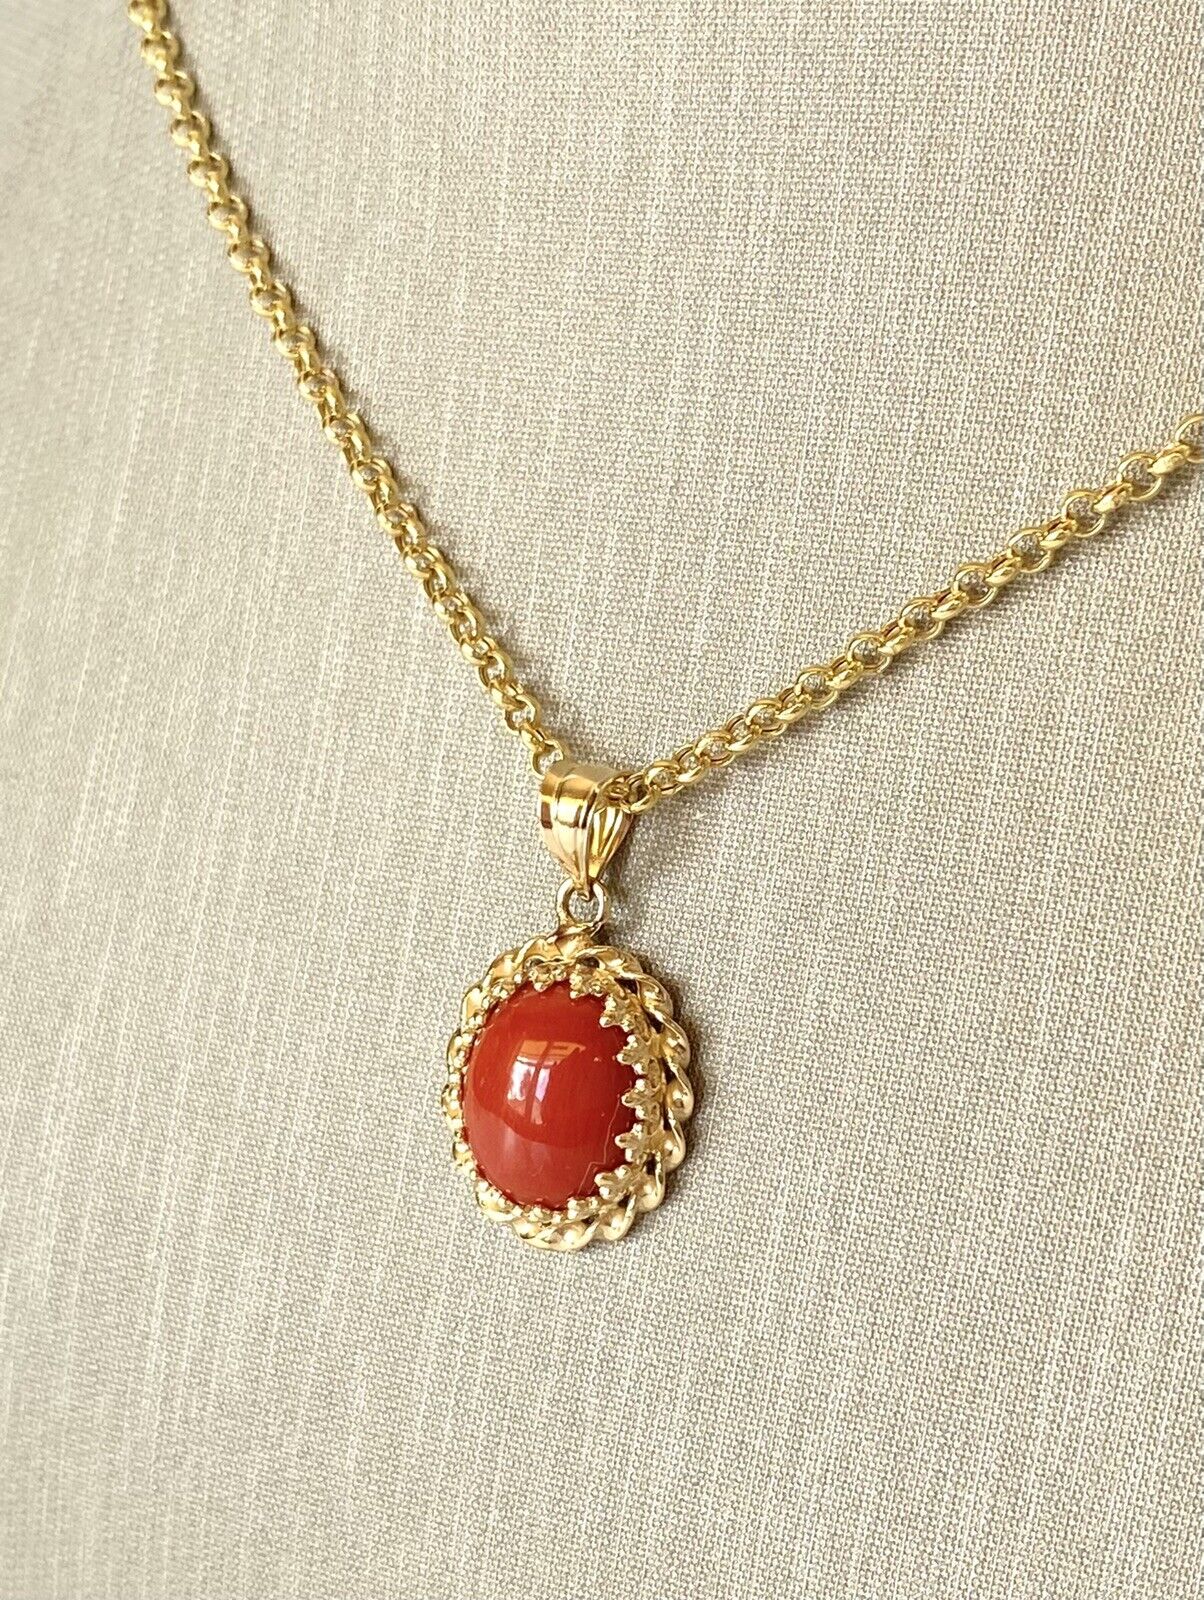 Lg Untreated Mediterranean Red Coral &14k Yellow Gold Handcrafted Pendant, New